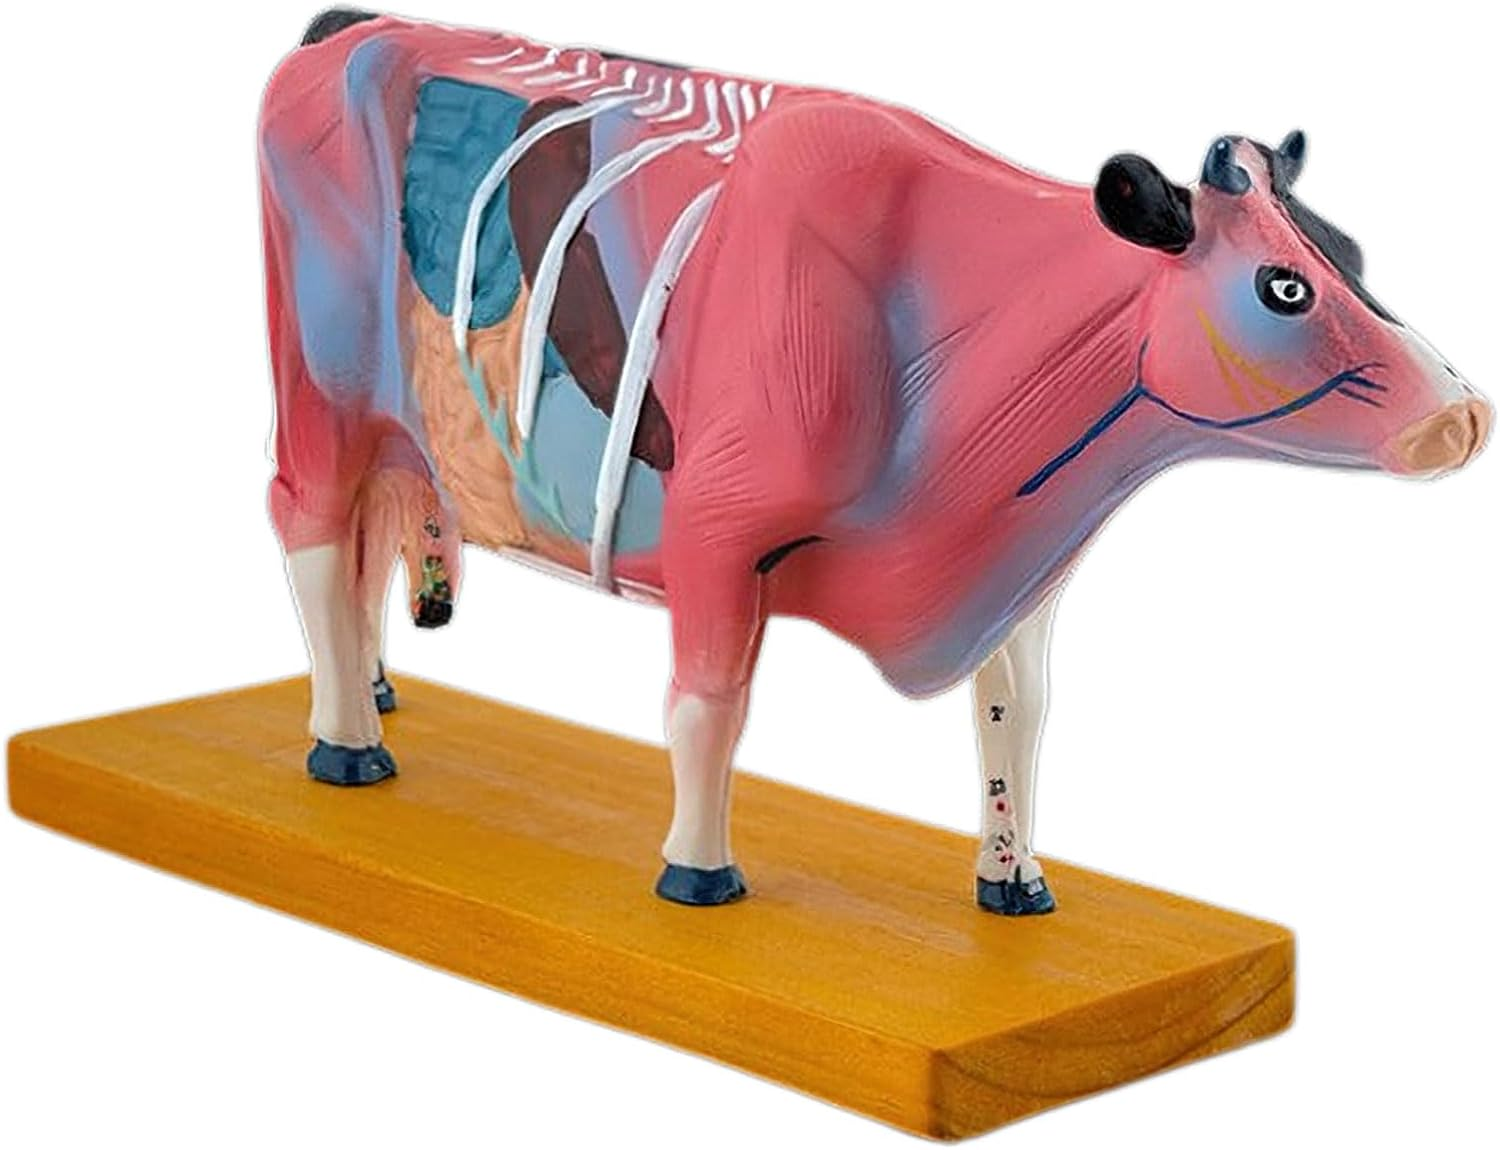 Cow Anatomy Model for and Moxibustion Anatomical Cow Model Animal Anatomical Model for Veterinary Learning Cow Anatomy Model Anatomy Model Animal Anatomy Model Anatomy Model Cow